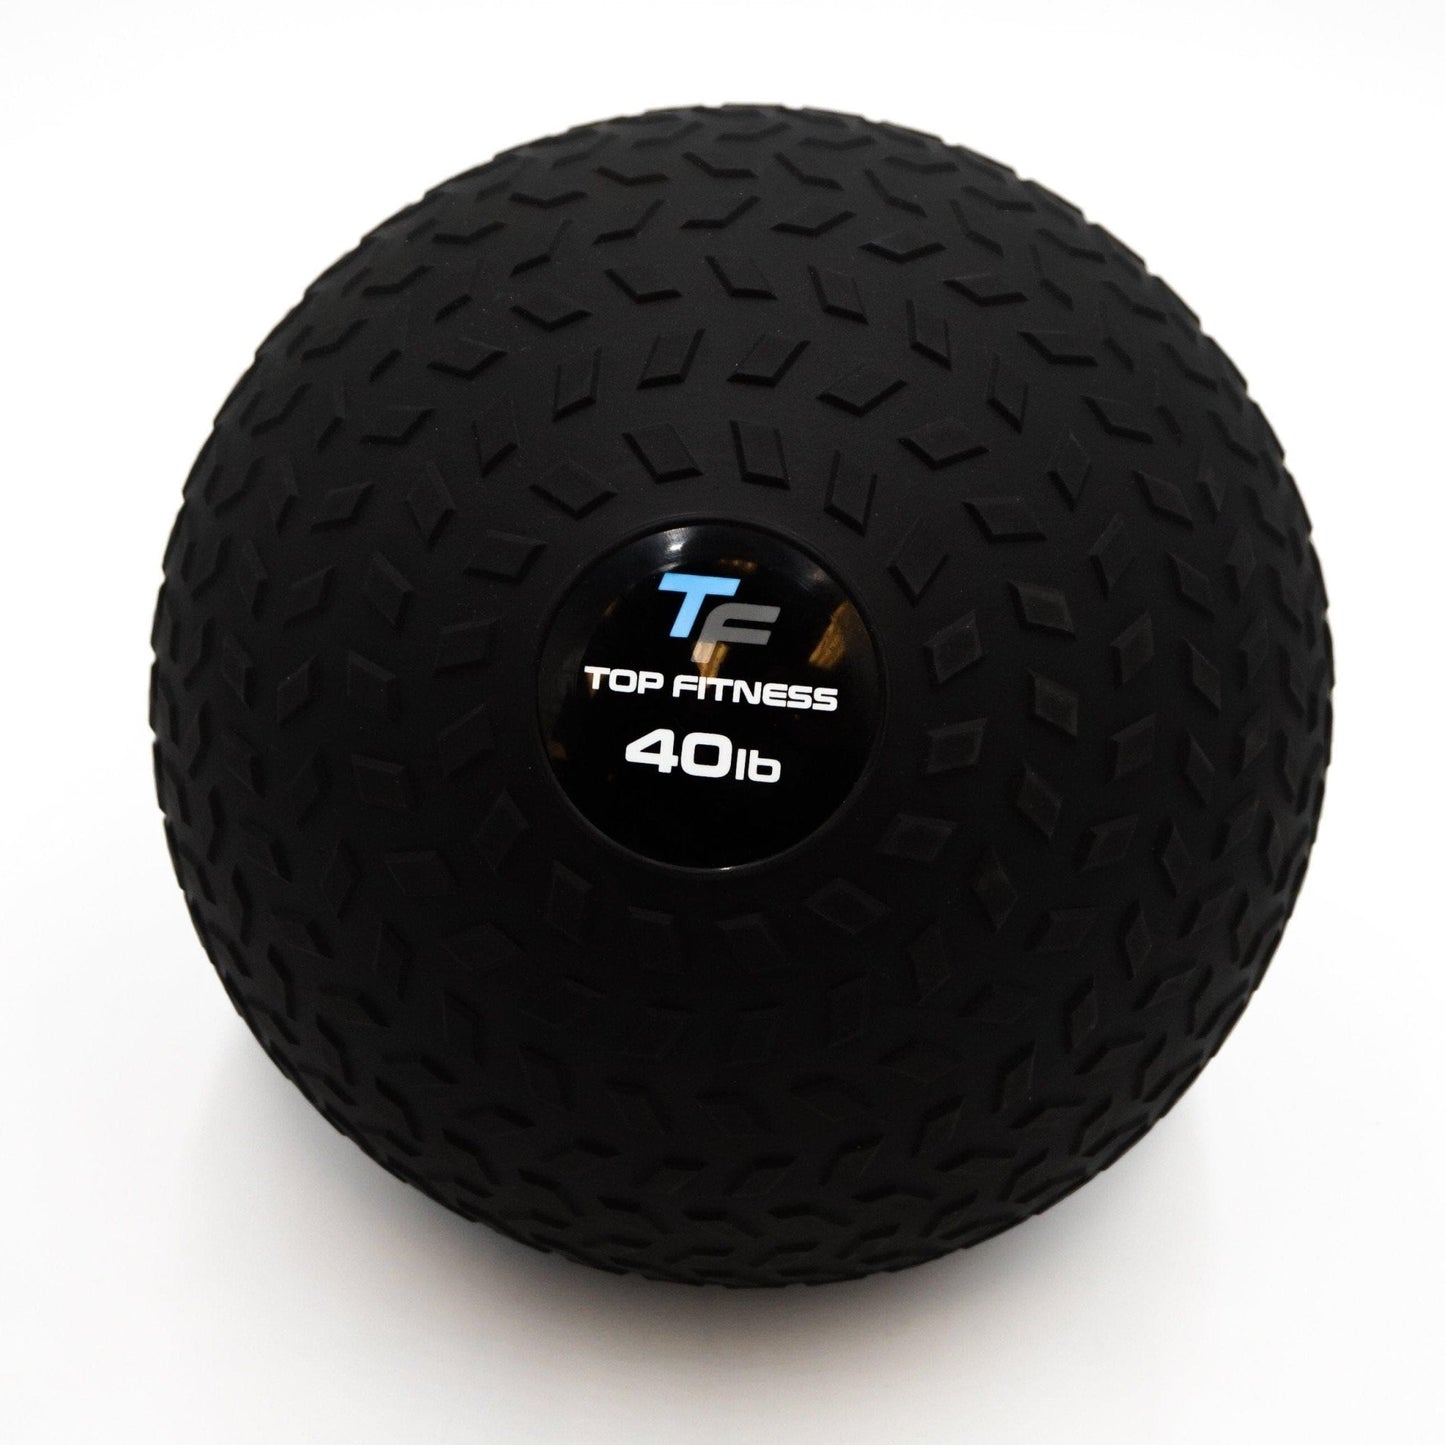 Top Fitness Slam Ball Weighted Resistance Top Fitness 40lb